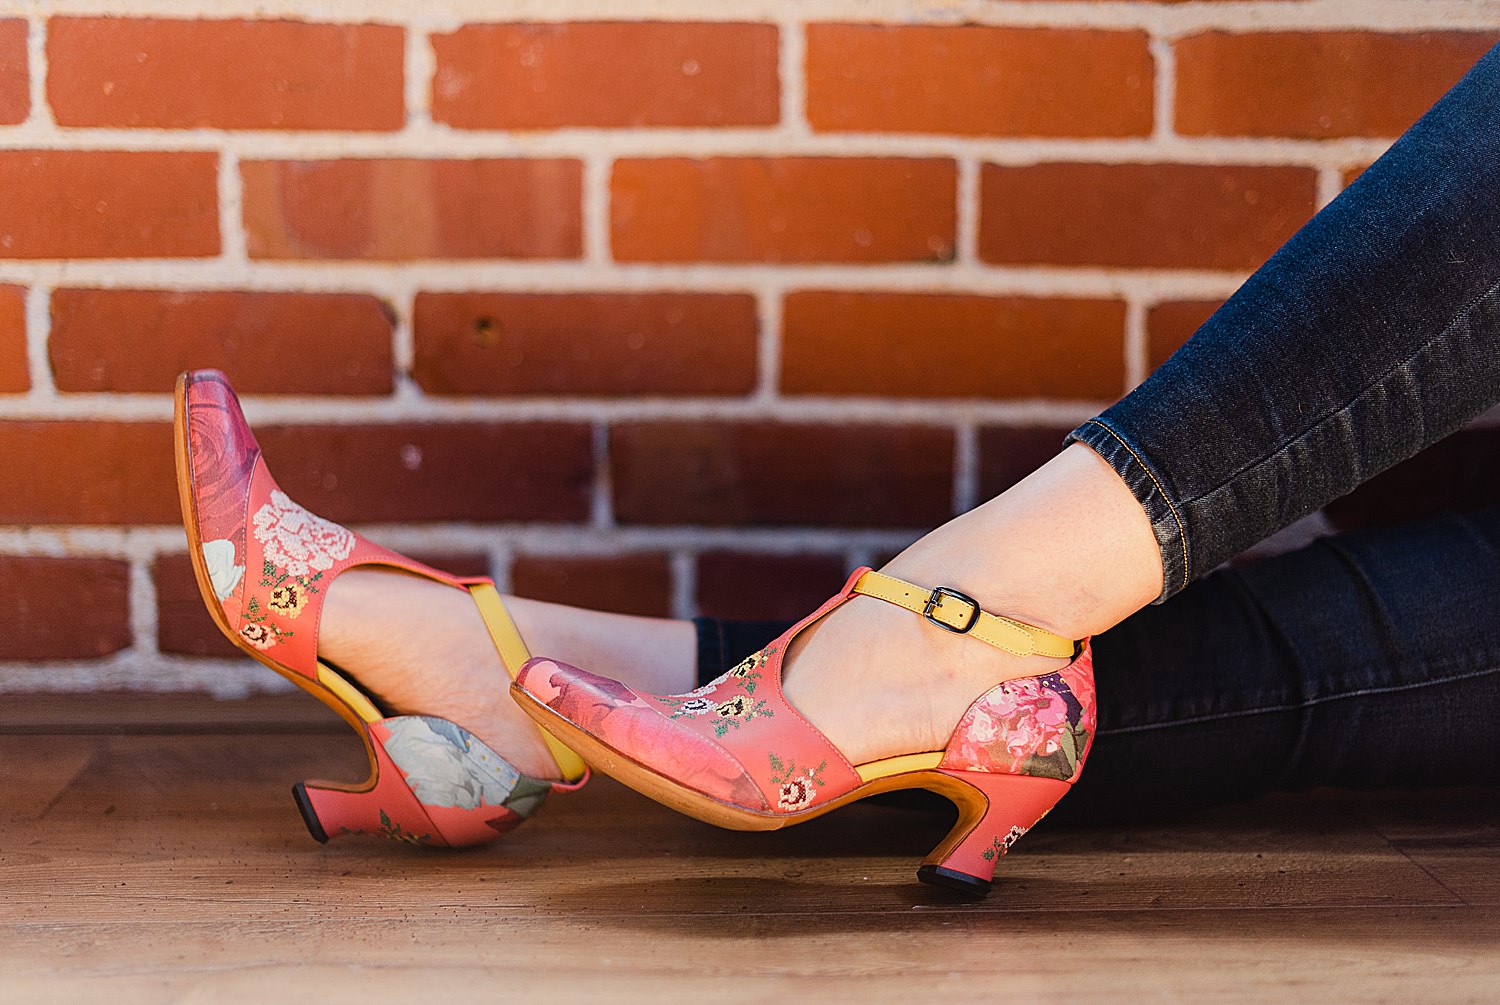 woman's feet wearing a coral-colored, floral shoes with two-inch heels